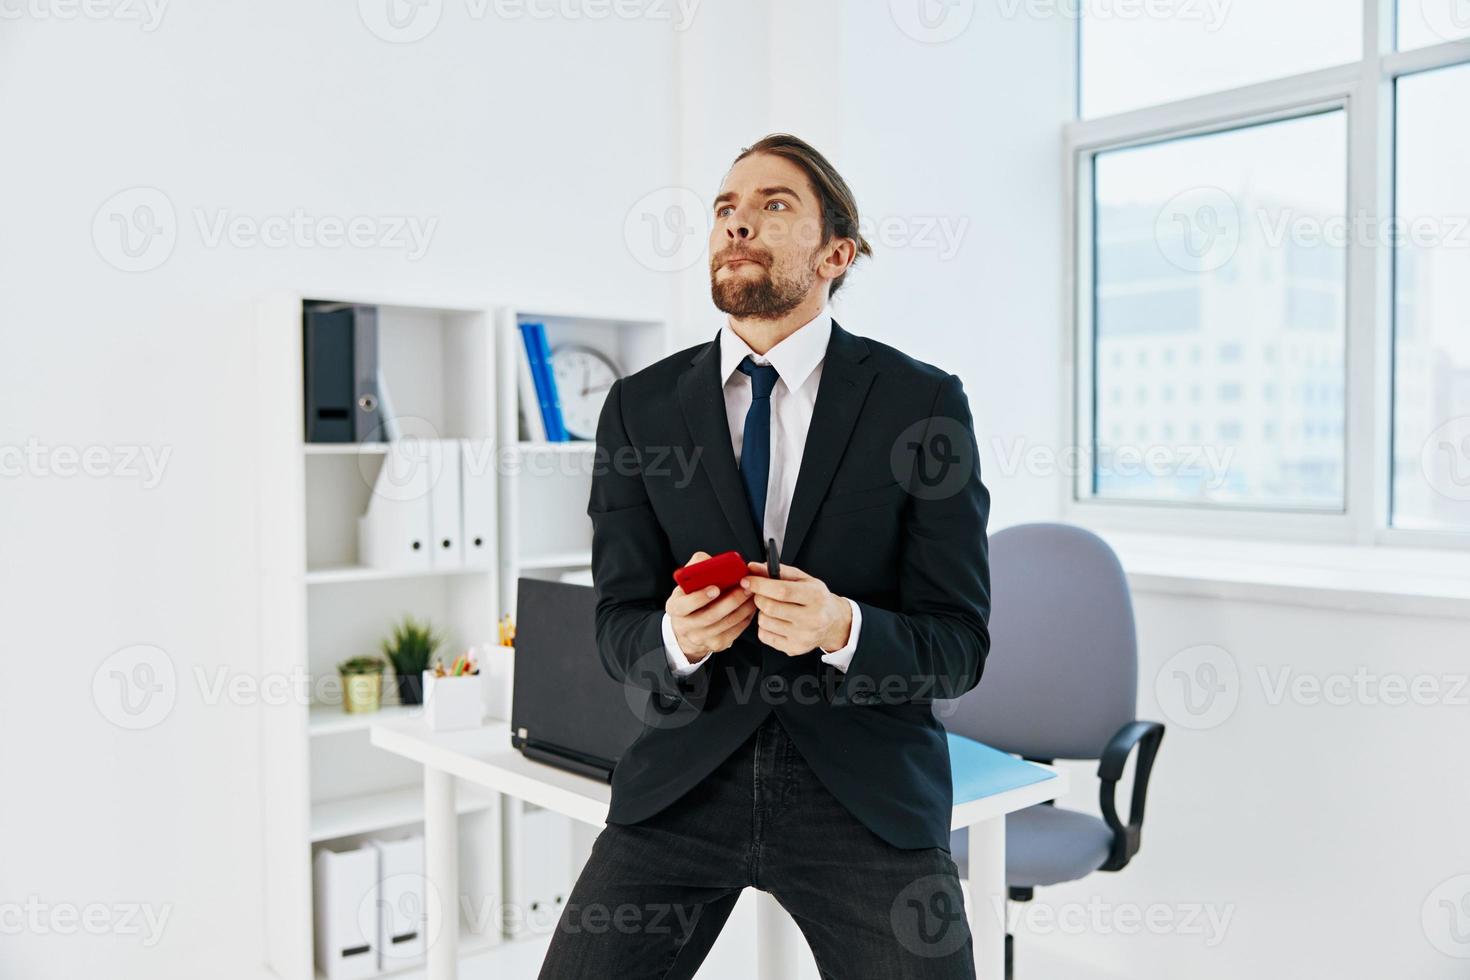 man in a suit official documents work office lifestyle photo